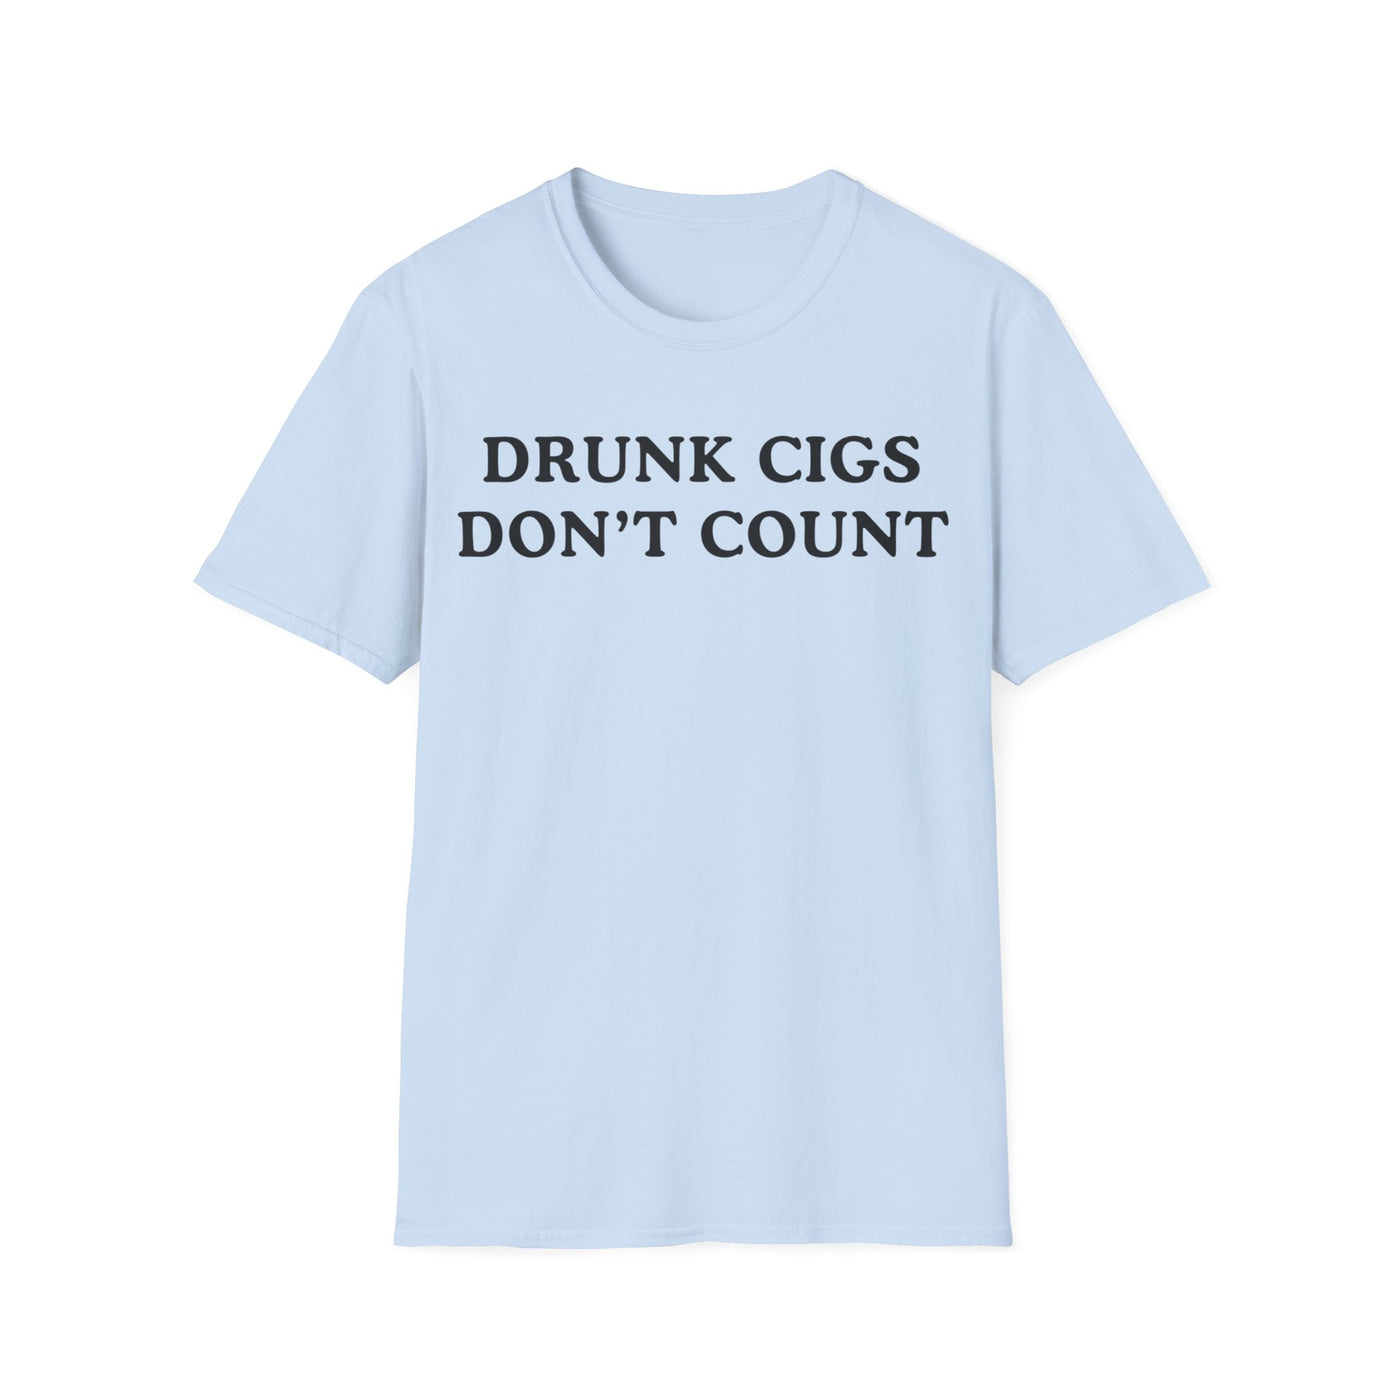 Drunk Cigs Don't Count